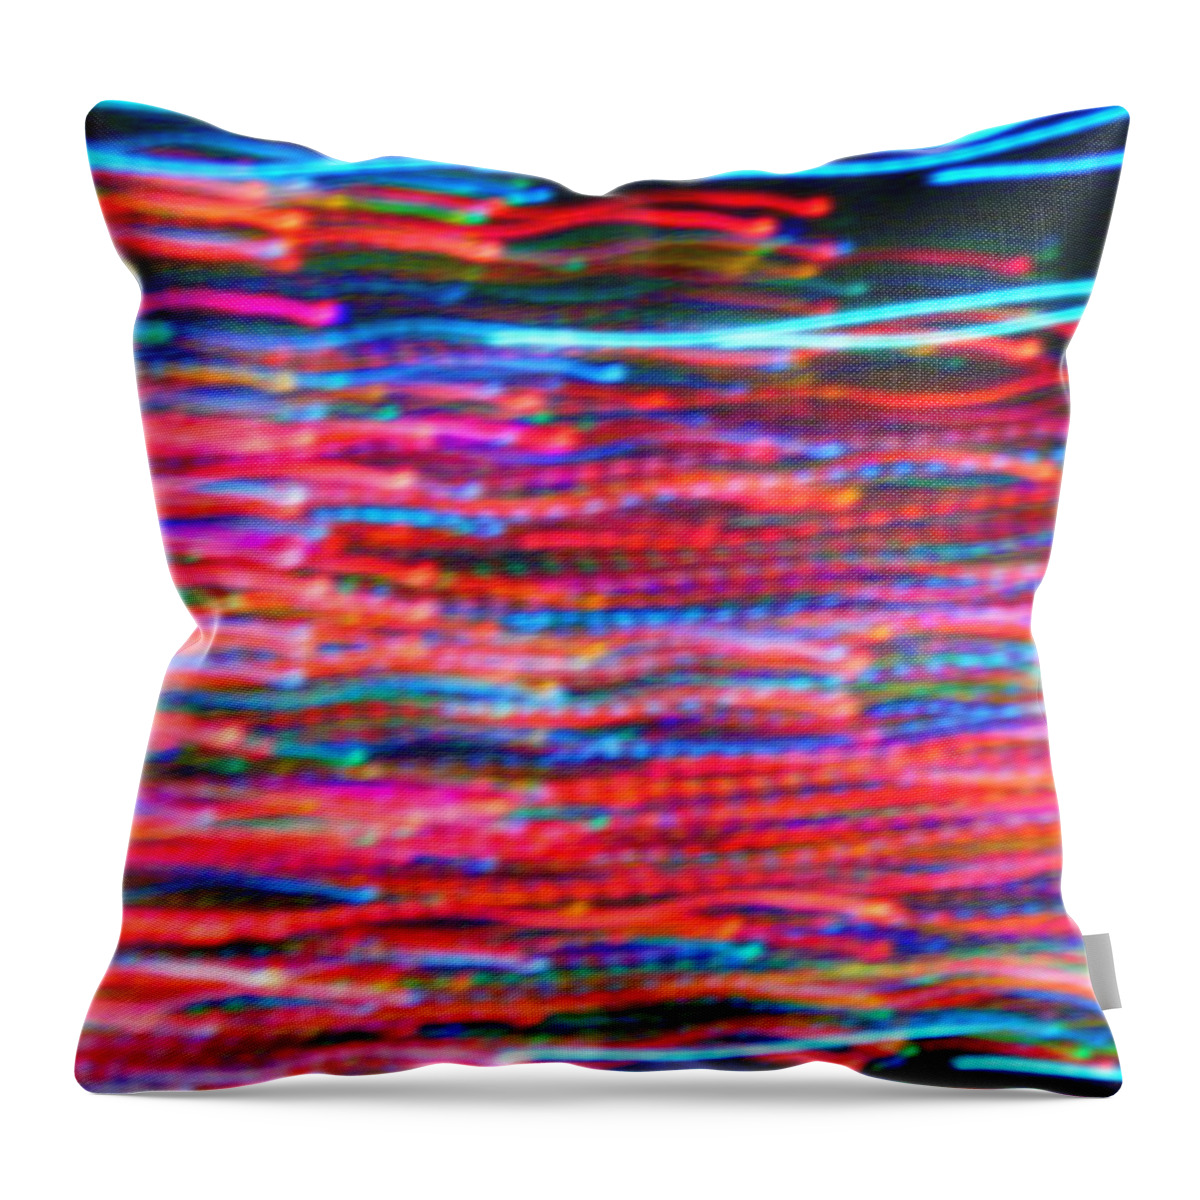 Background Throw Pillow featuring the digital art In Flow by Vincent Green